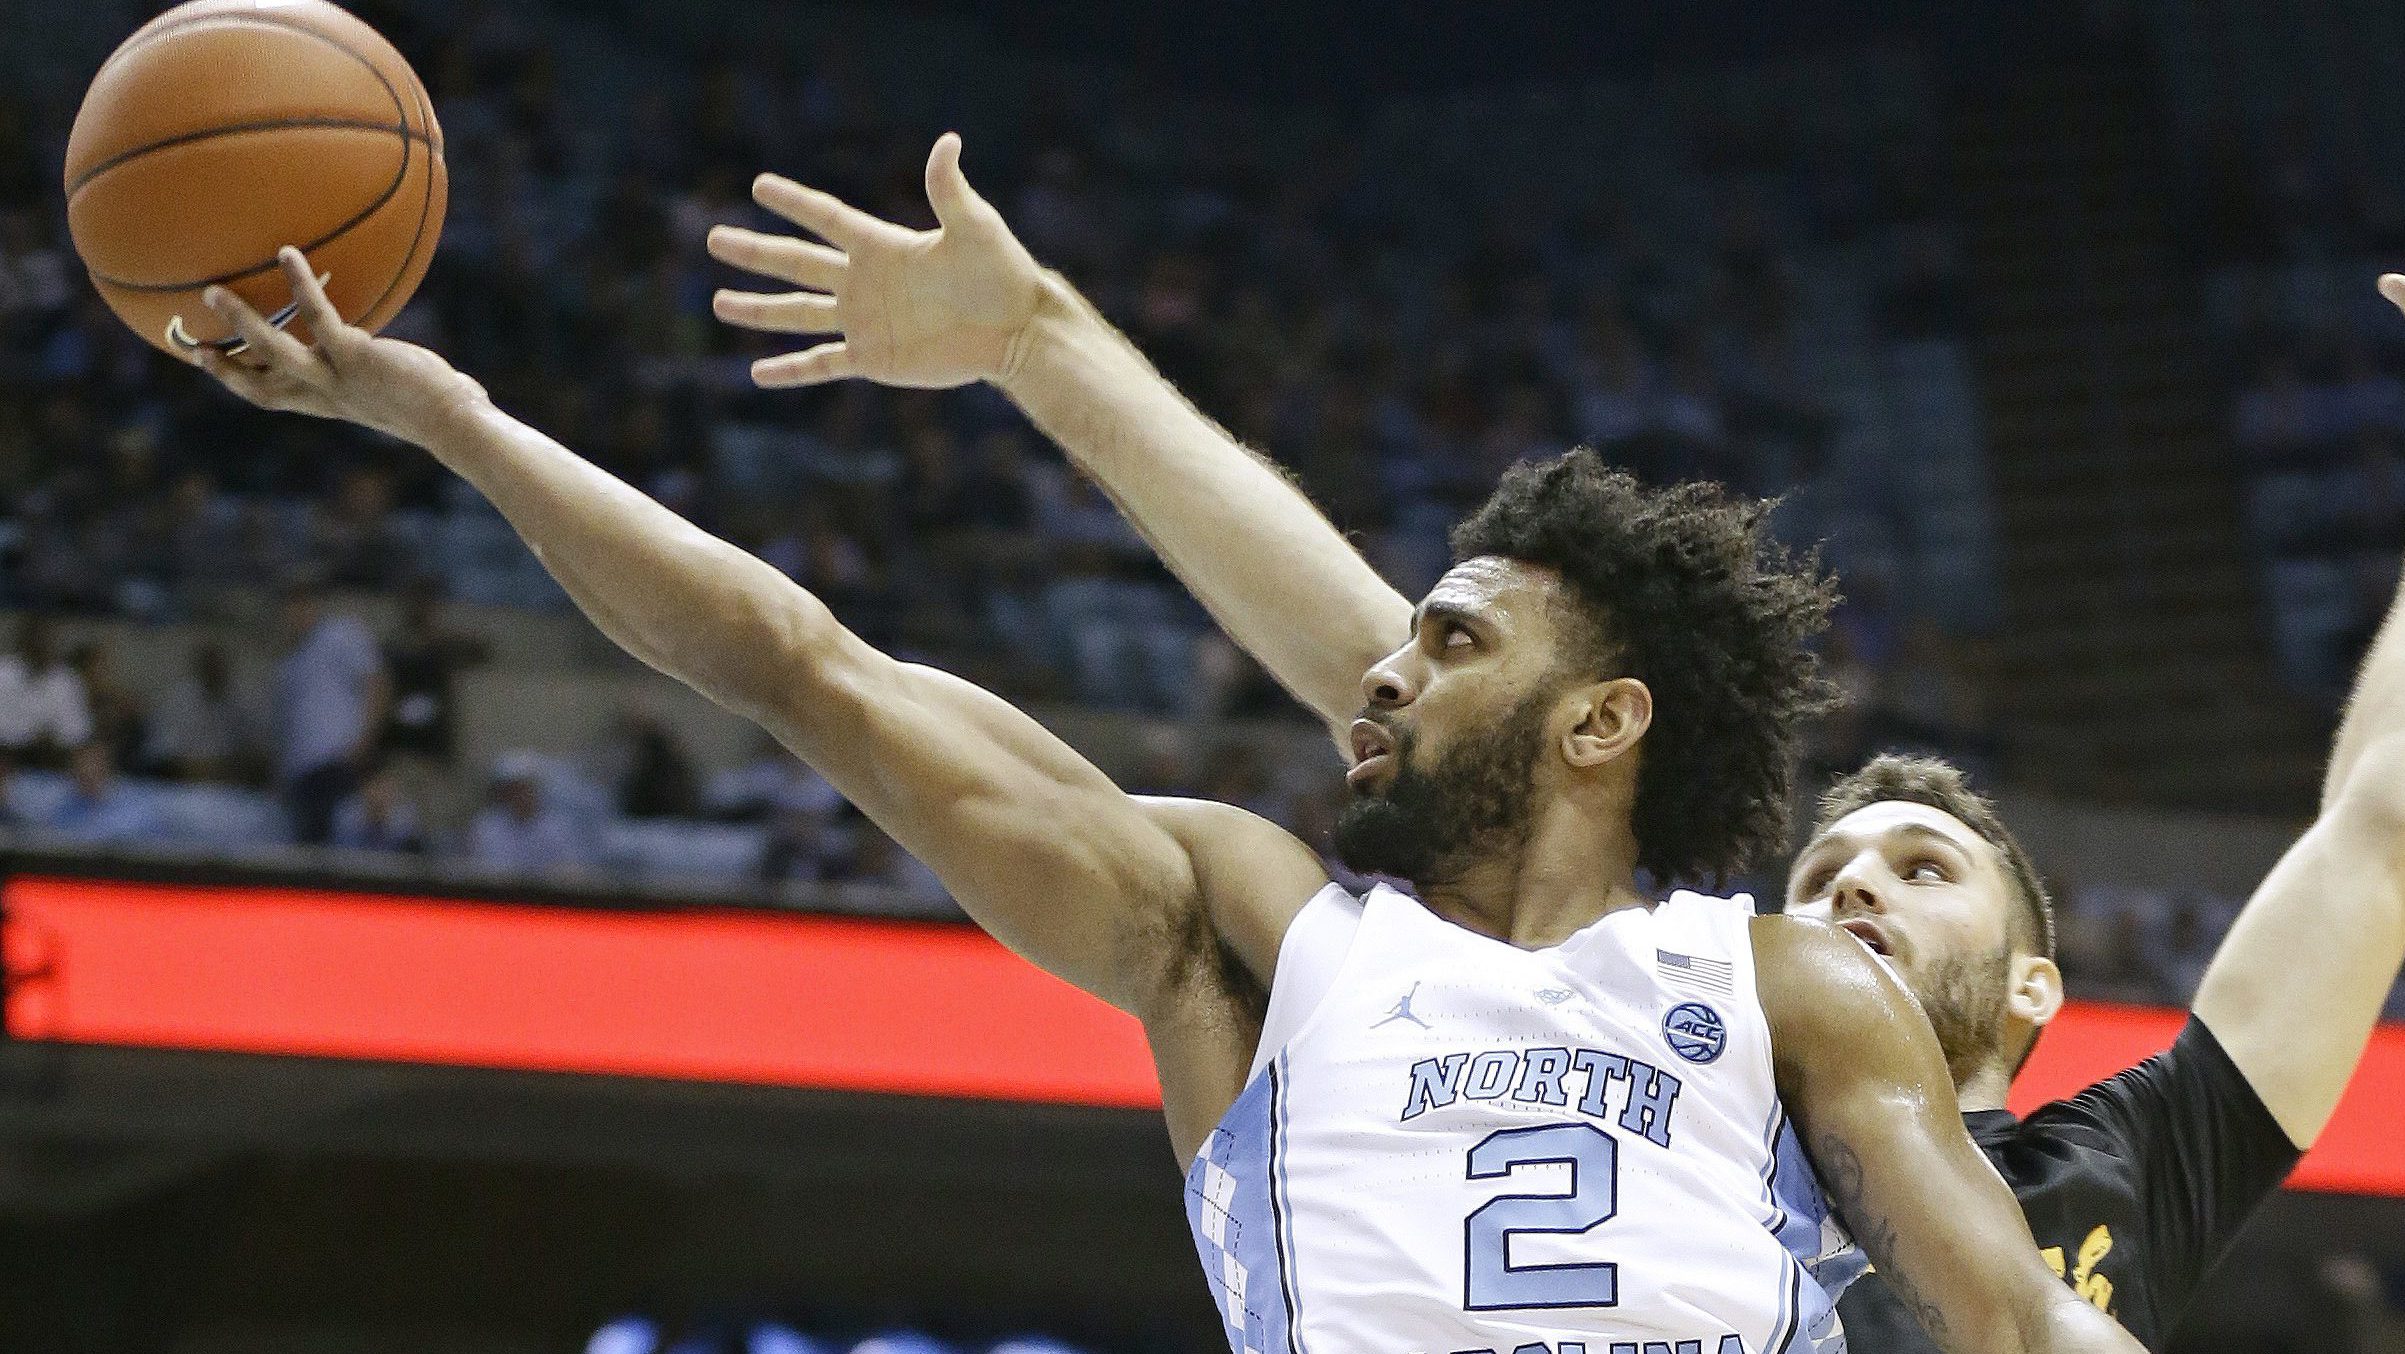 North Carolina's Joel Berry II (2) drives to the basket against Long Beach State's Gabe Levin (0) during the first half of an NCAA college basketball game in Chapel Hill, N.C., Tuesday, Nov. 15, 2016. (AP Photo/Gerry Broome)